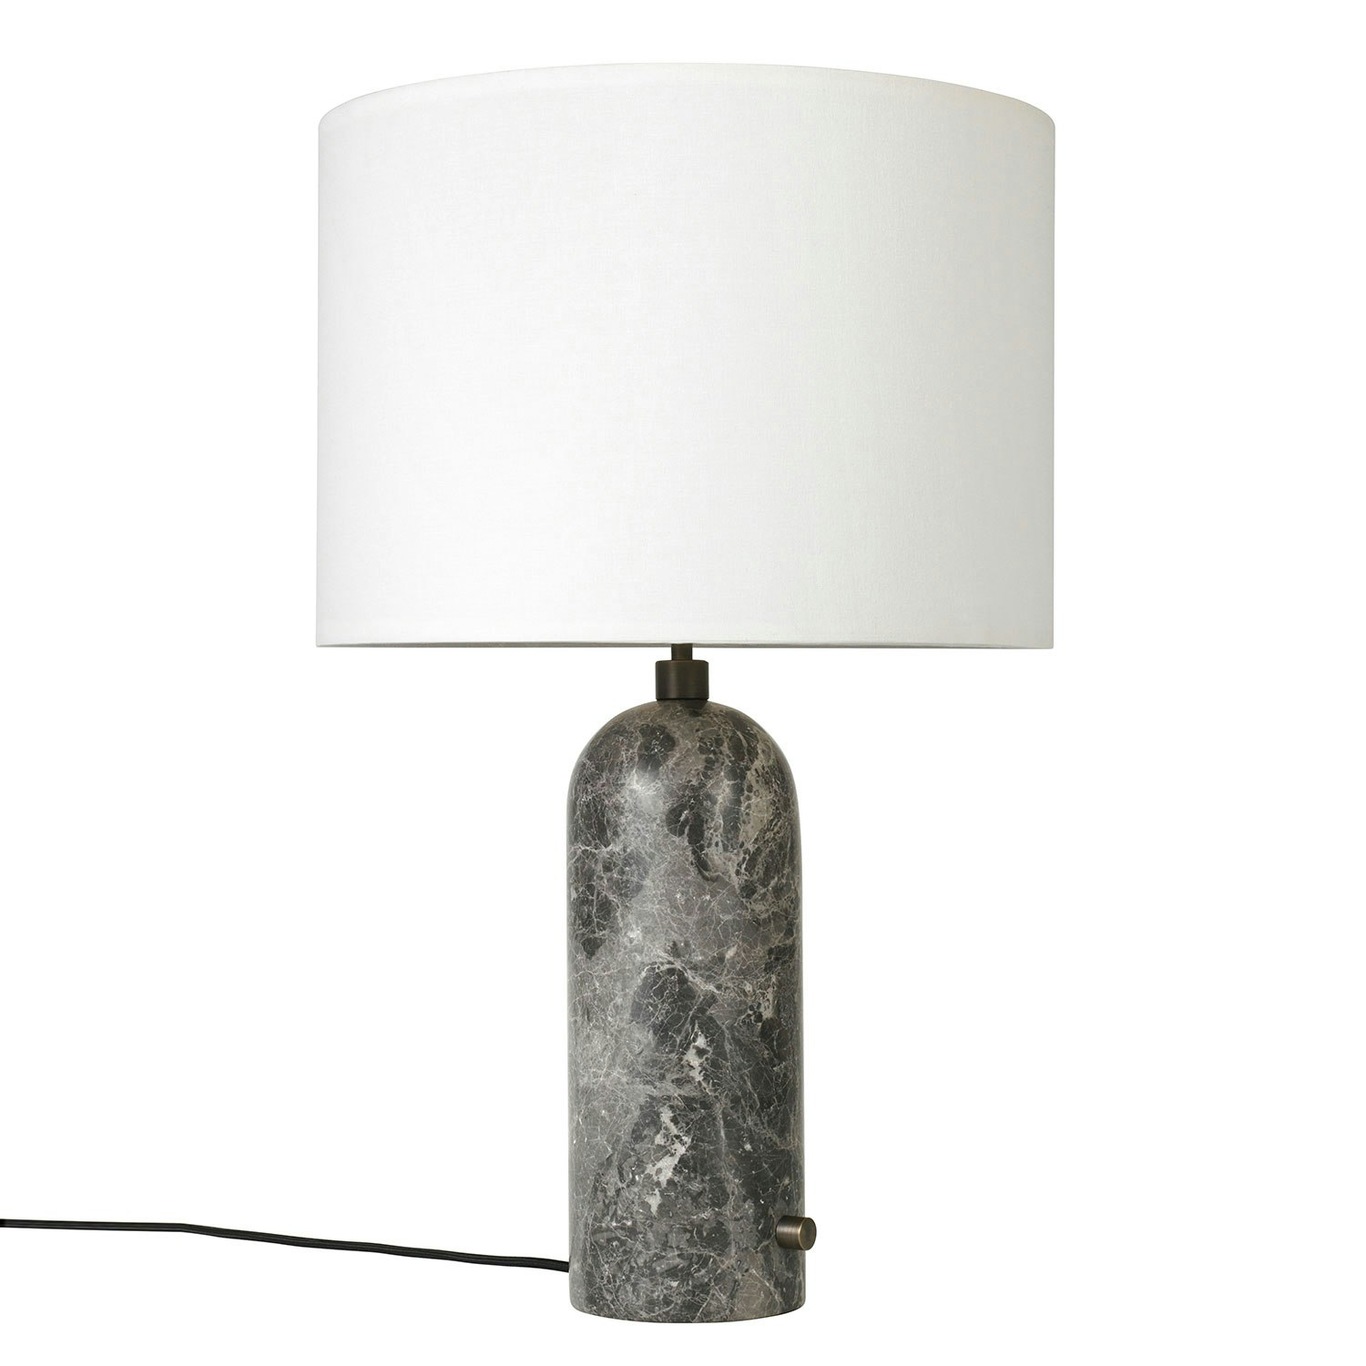 Gravity Table Lamp Large, Grey Marble / White